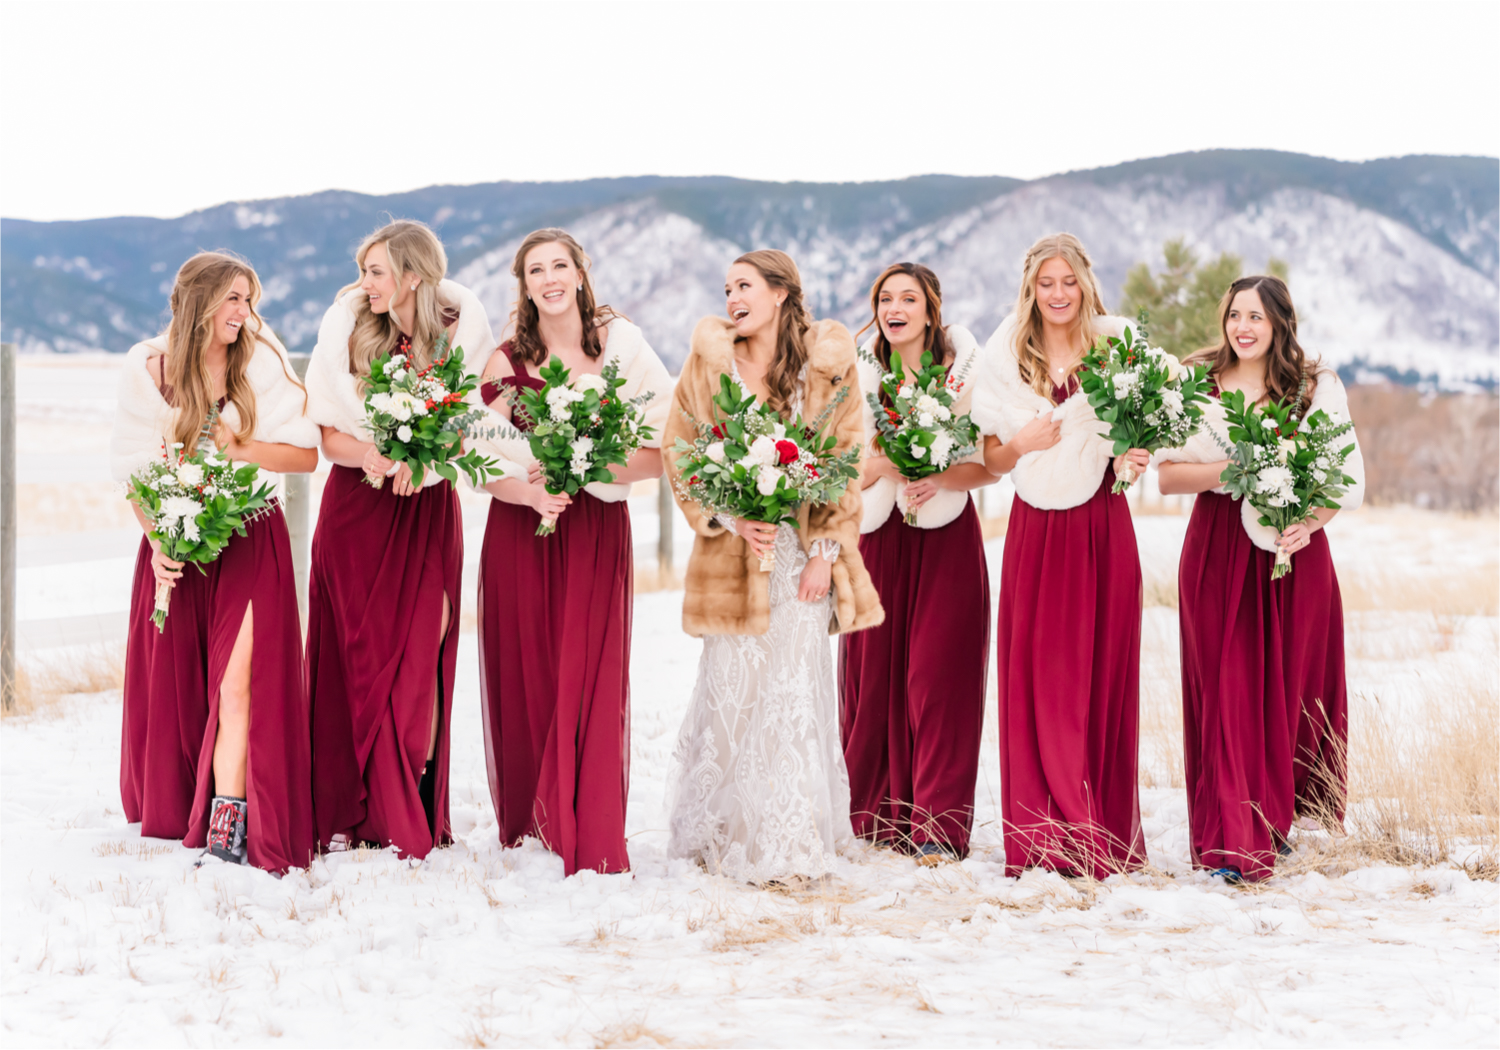 Winter Wonderland Wedding in Colorado Springs | Britni Girard Photography Colorado Wedding Photography and Film Team | Snow covered mountains and Christmas just a few days away | Annika + John's Nostalgic Winter Wedding | Bride's Dress iDream Bridal Essence of Australia | Air Force Academy | Snowy Wedding Party Portraits with Fur minks for bridesmaids in burgundy Azazie dresses